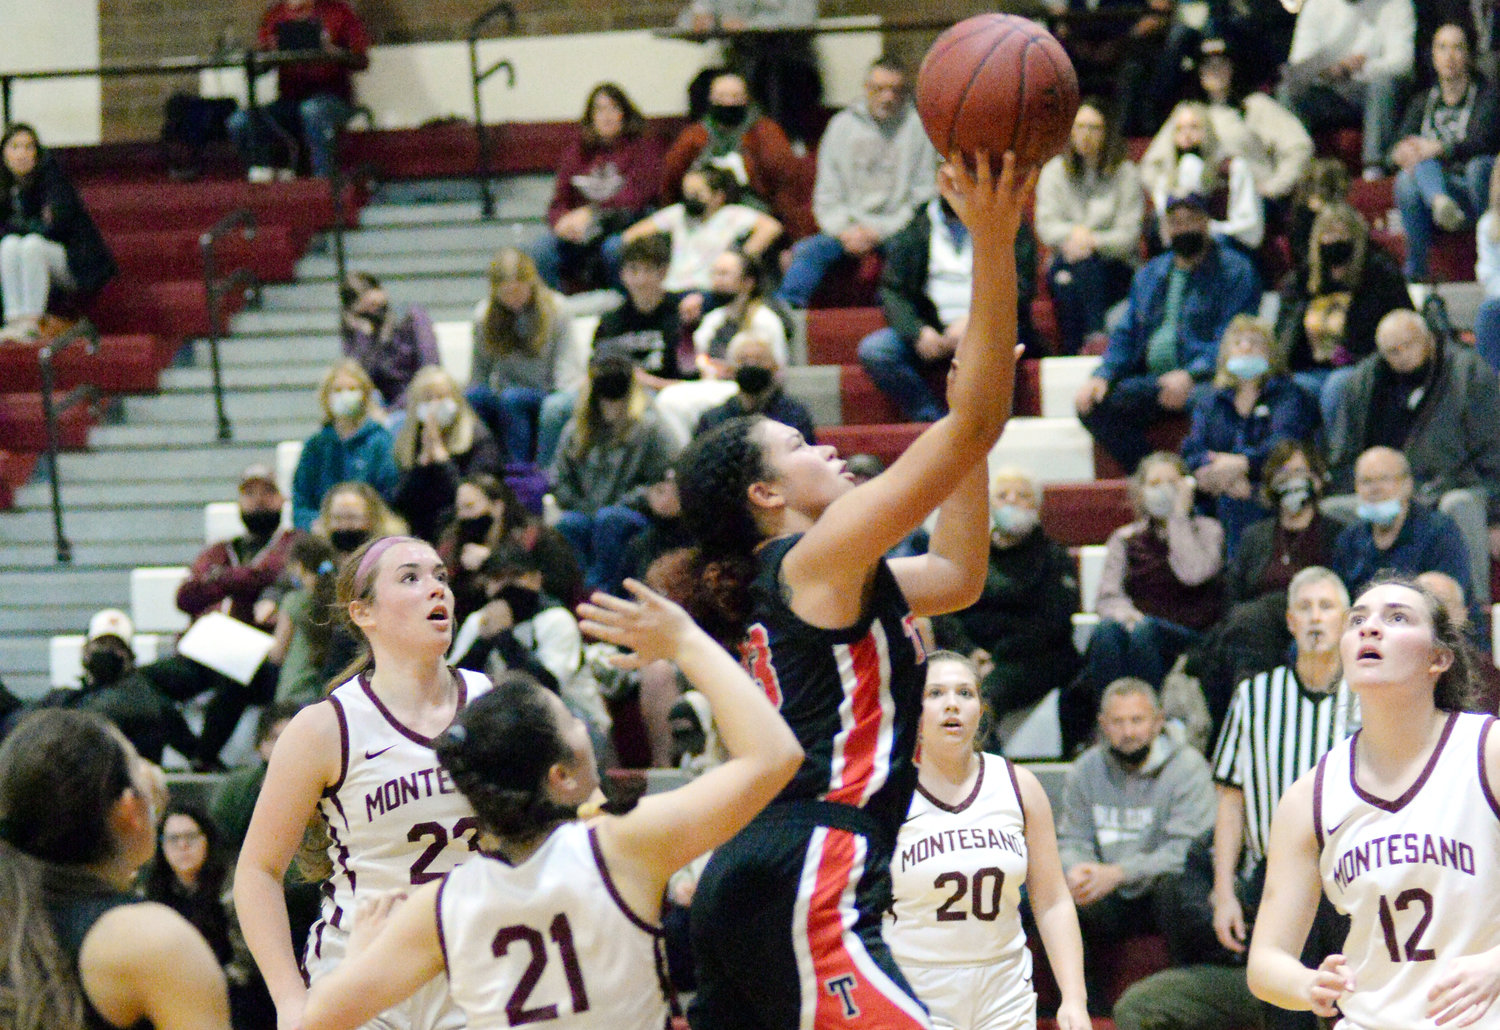 Tenino's Alivia Hunter drives to the bucket during a road game at Montesano on Feb. 4.